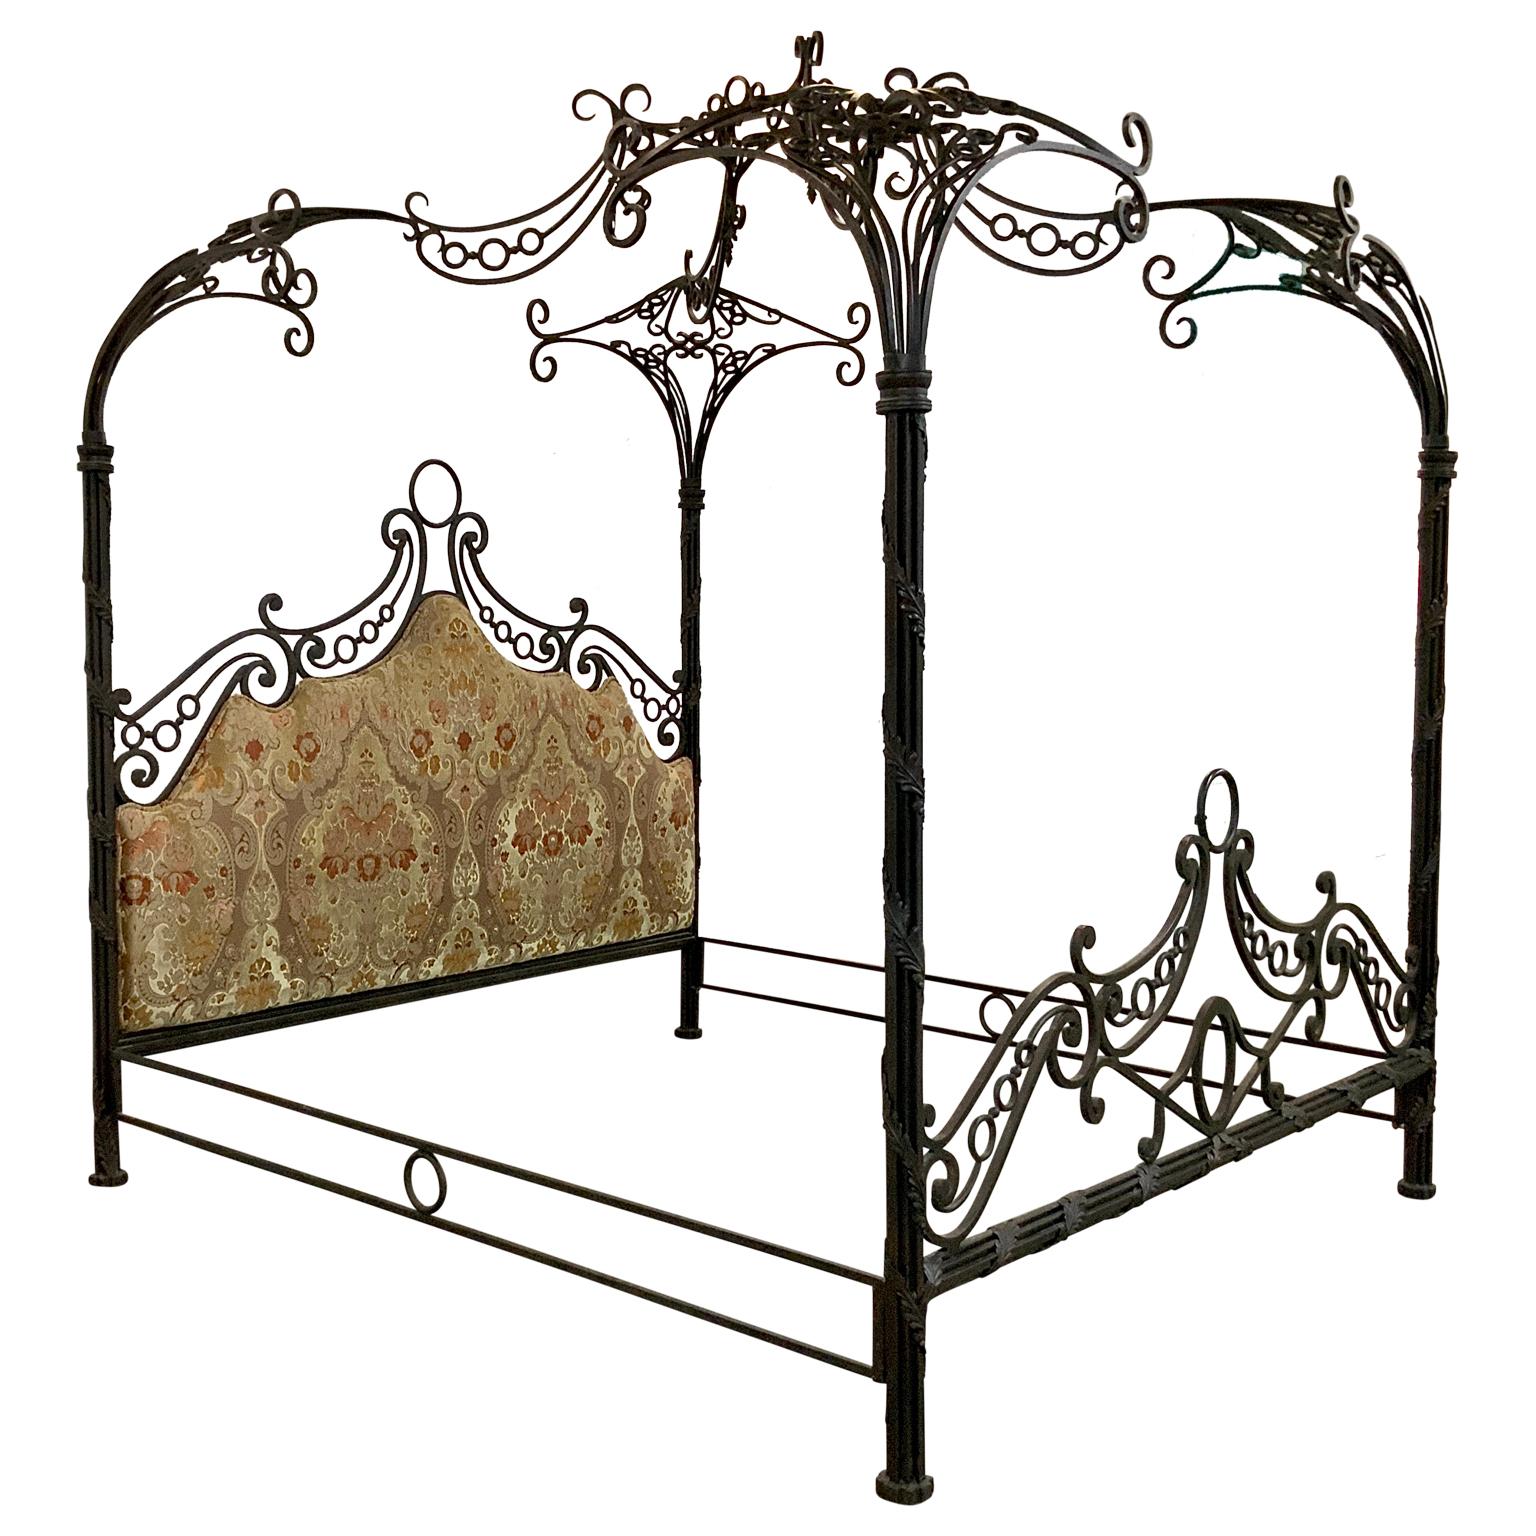 A custom made designer iron bed. Made for royalty and sold in America. Phyllis Morris exquisite furniture. Located in Los Angeles, this company makes custom pieces in the style of European Kings and Queens. All handmade wrought iron. Slightly larger